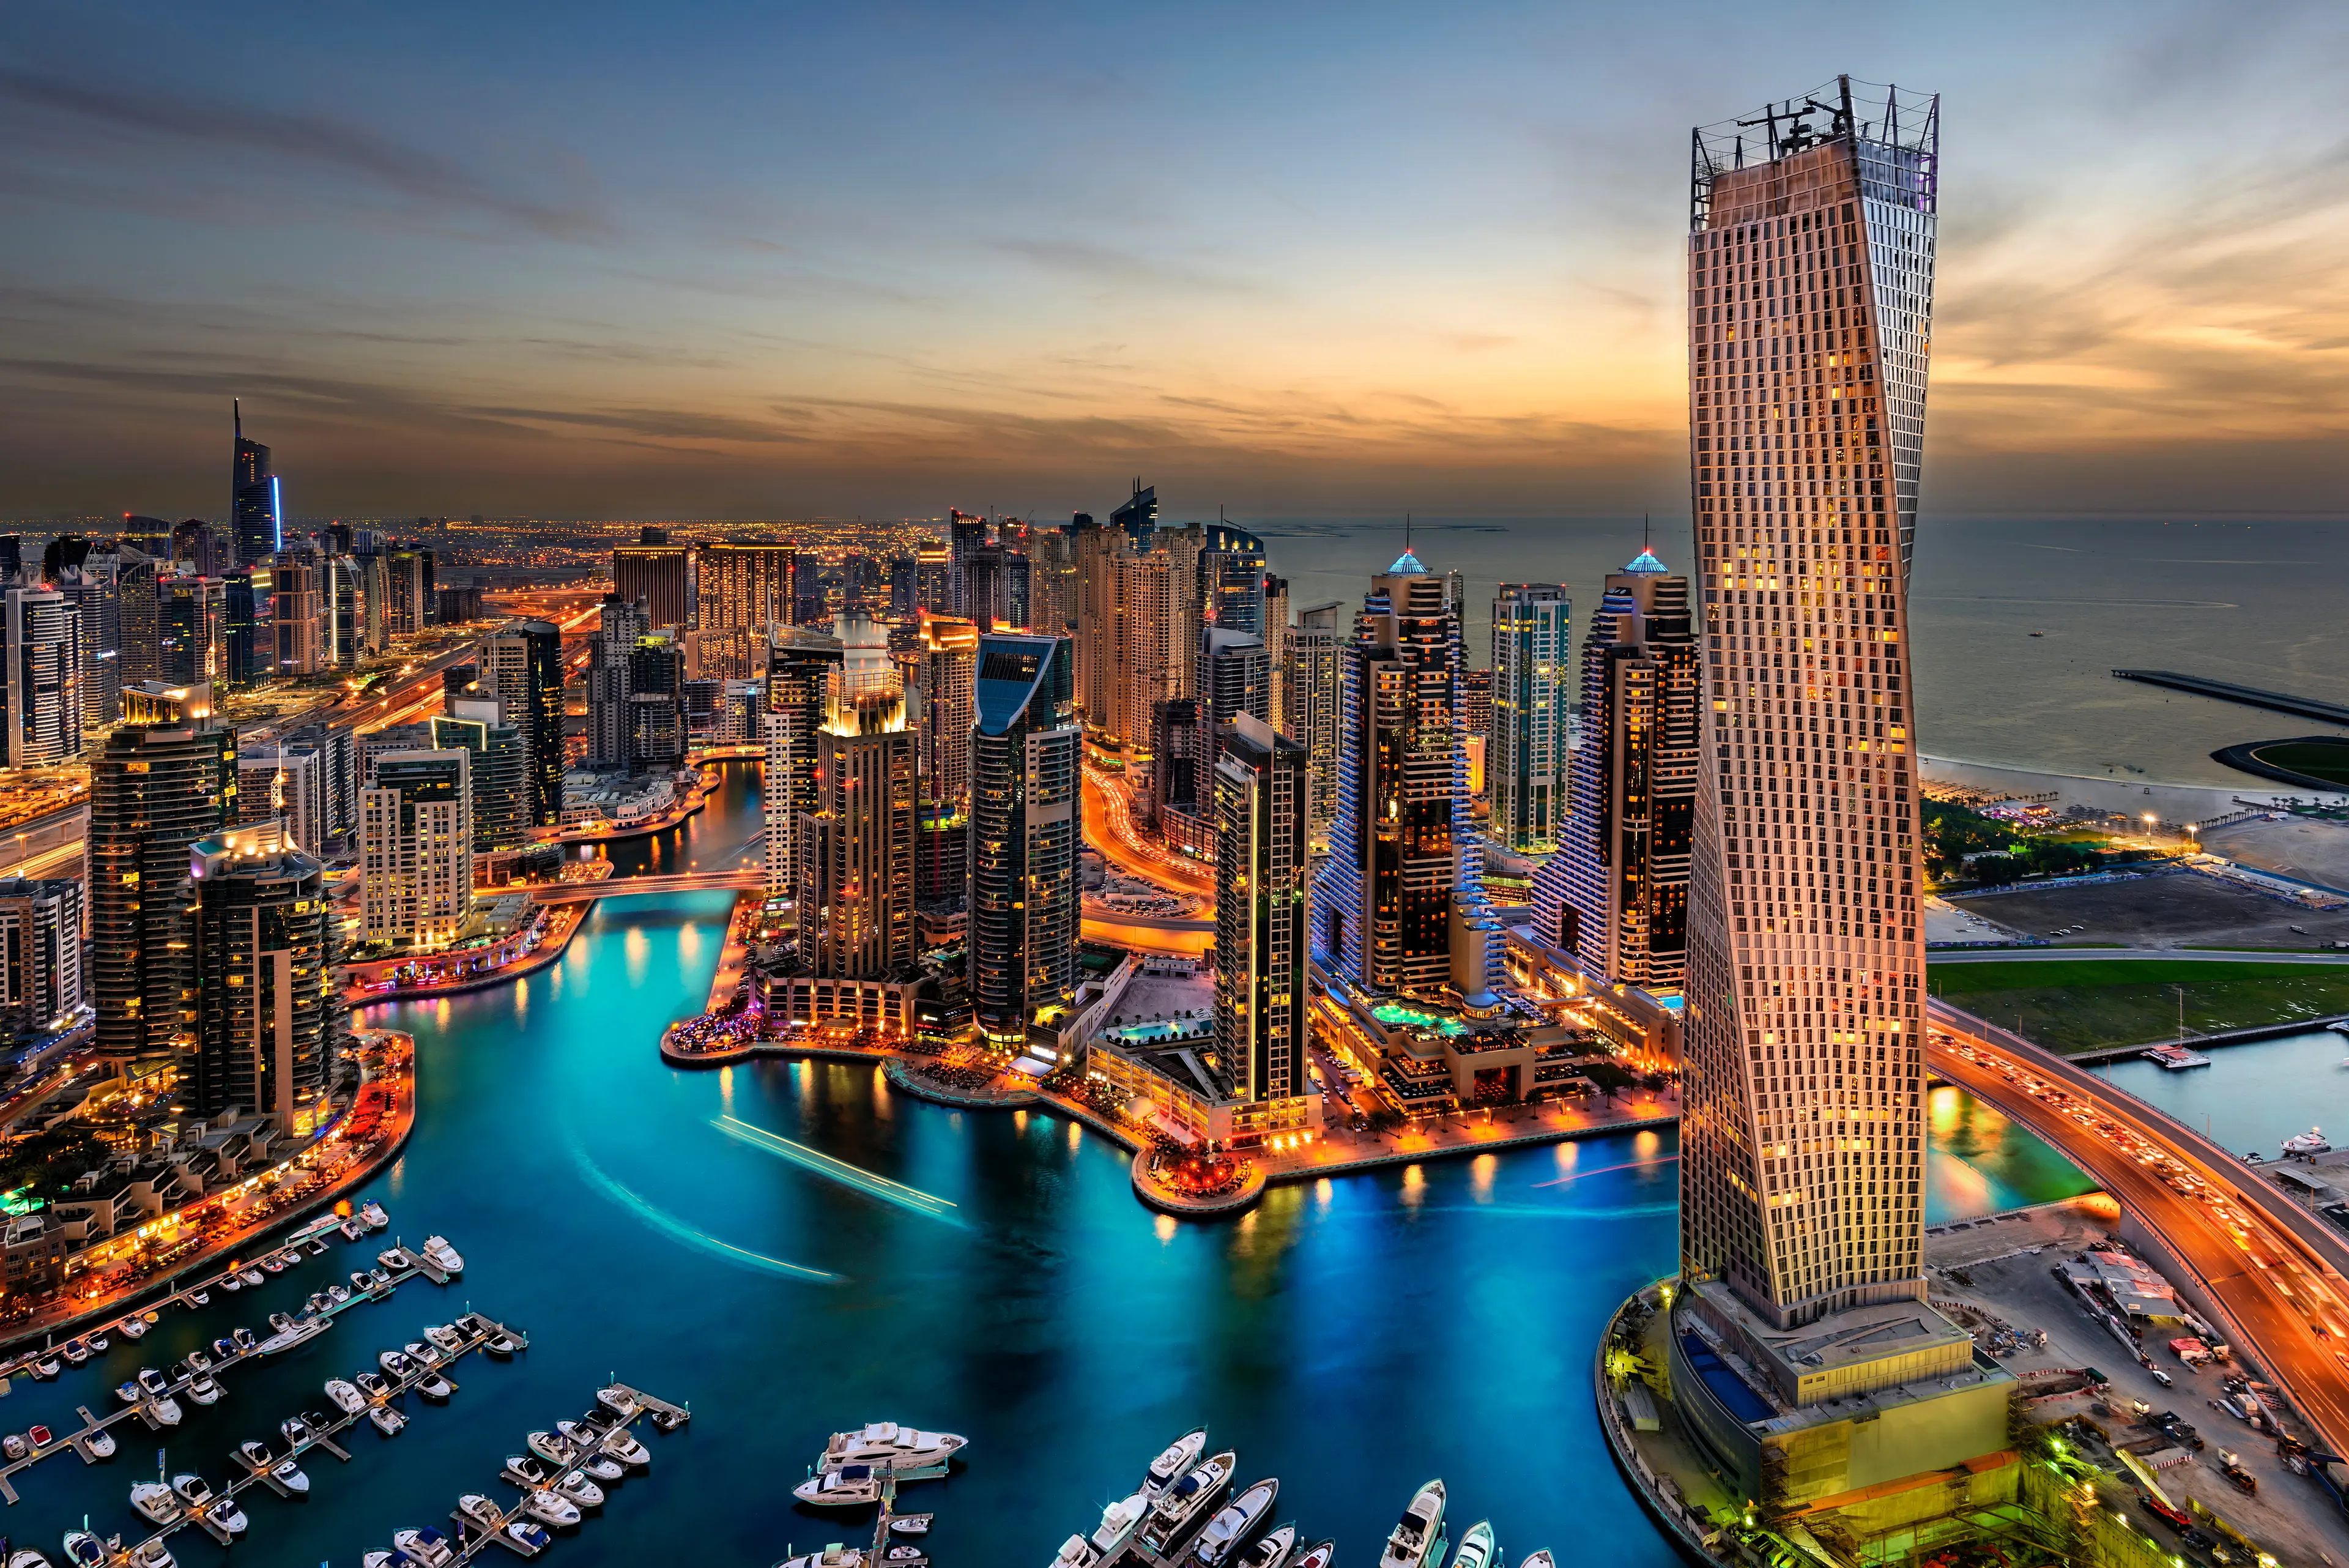 2-Day Dubai Adventure: Outdoor and Shopping Trip with Friends